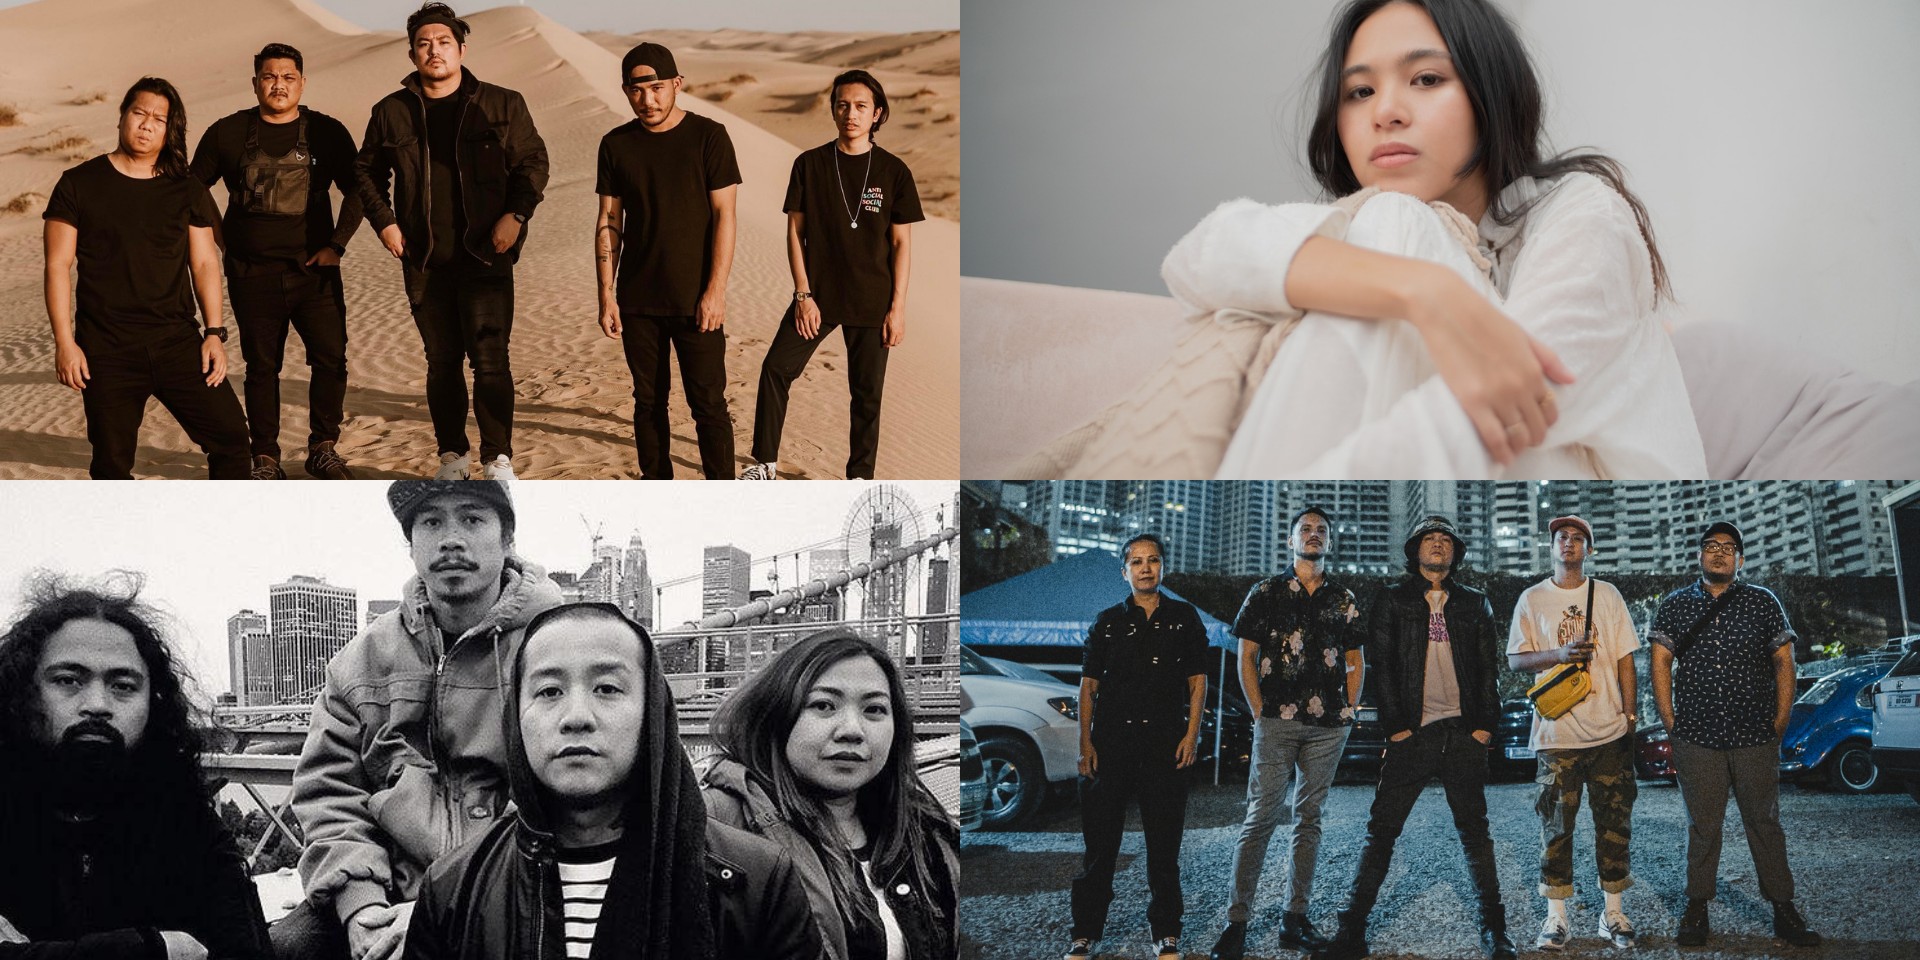 19 East eases into alert level 1 with March gig lineup – December Avenue, Clara Benin, Sandwich, Urbandub, and more